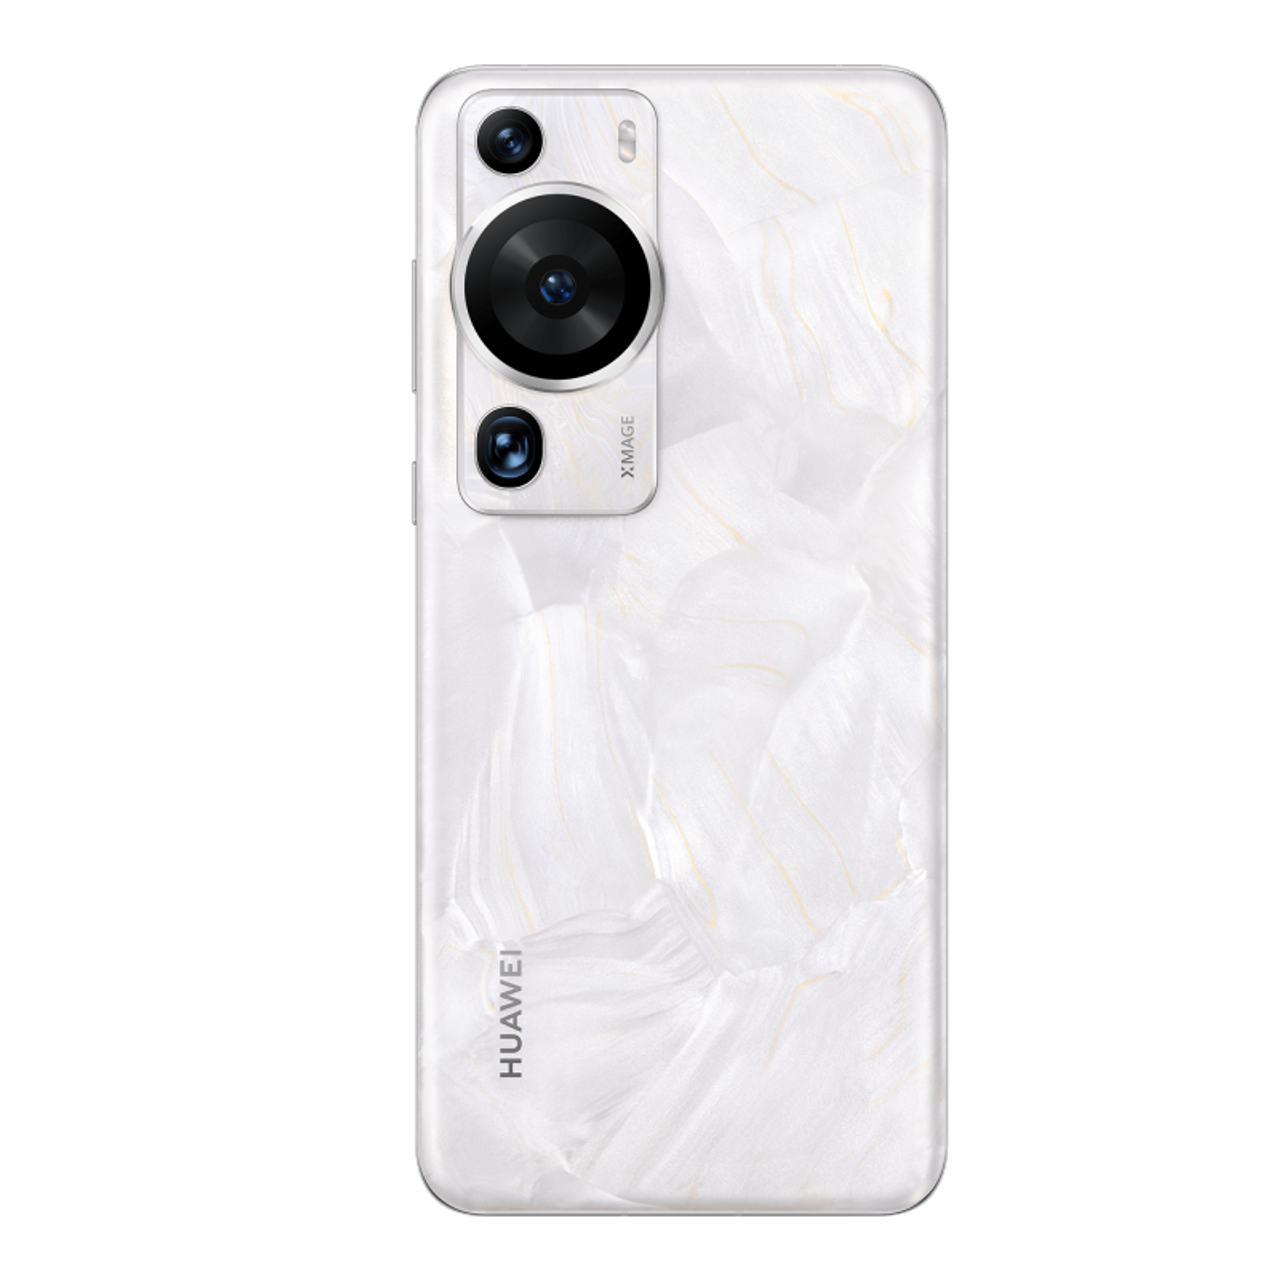 HUAWEI P60 Pro Specifications - HUAWEI Levant